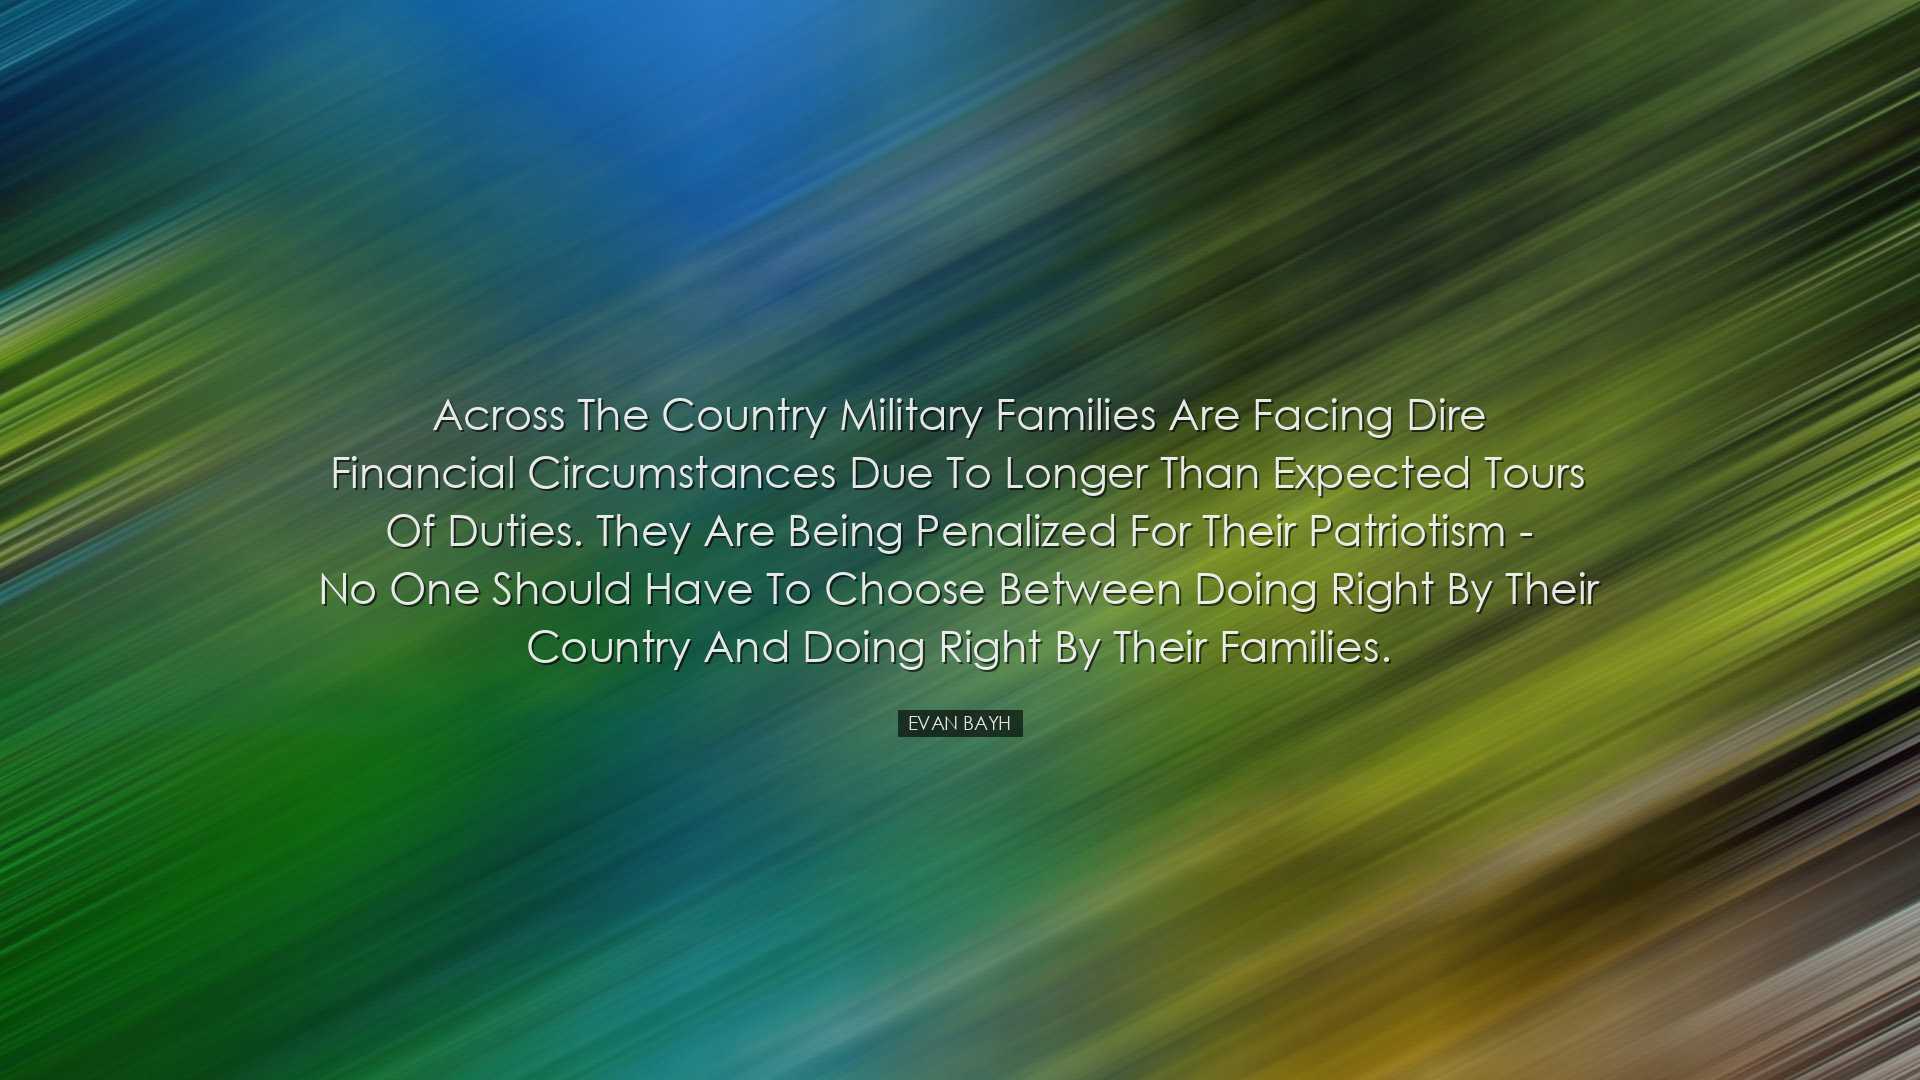 Across the country military families are facing dire financial cir